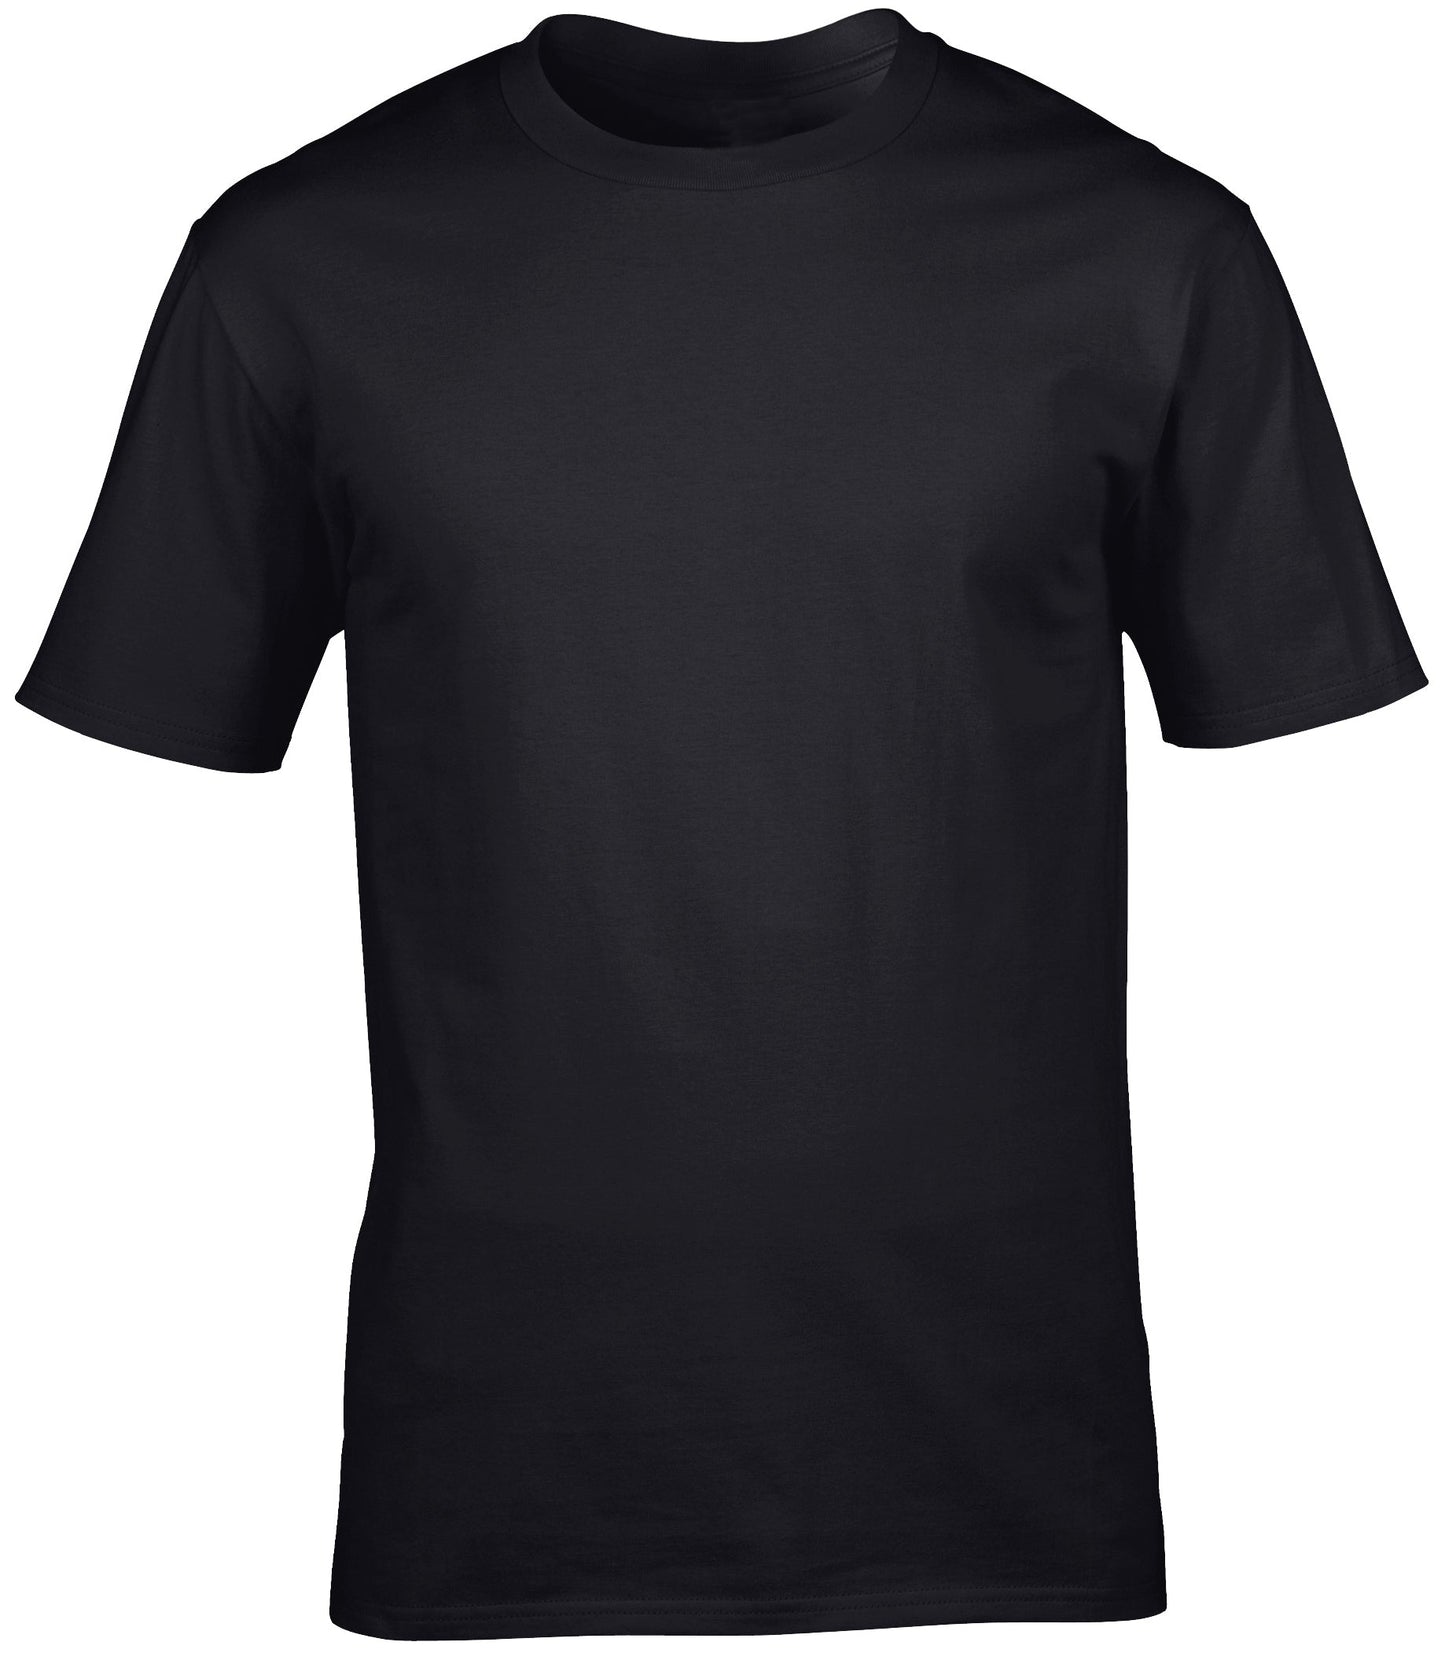 Just Text Workwear Unisex T-shirt Save £3 per item when ordering 5 or more!